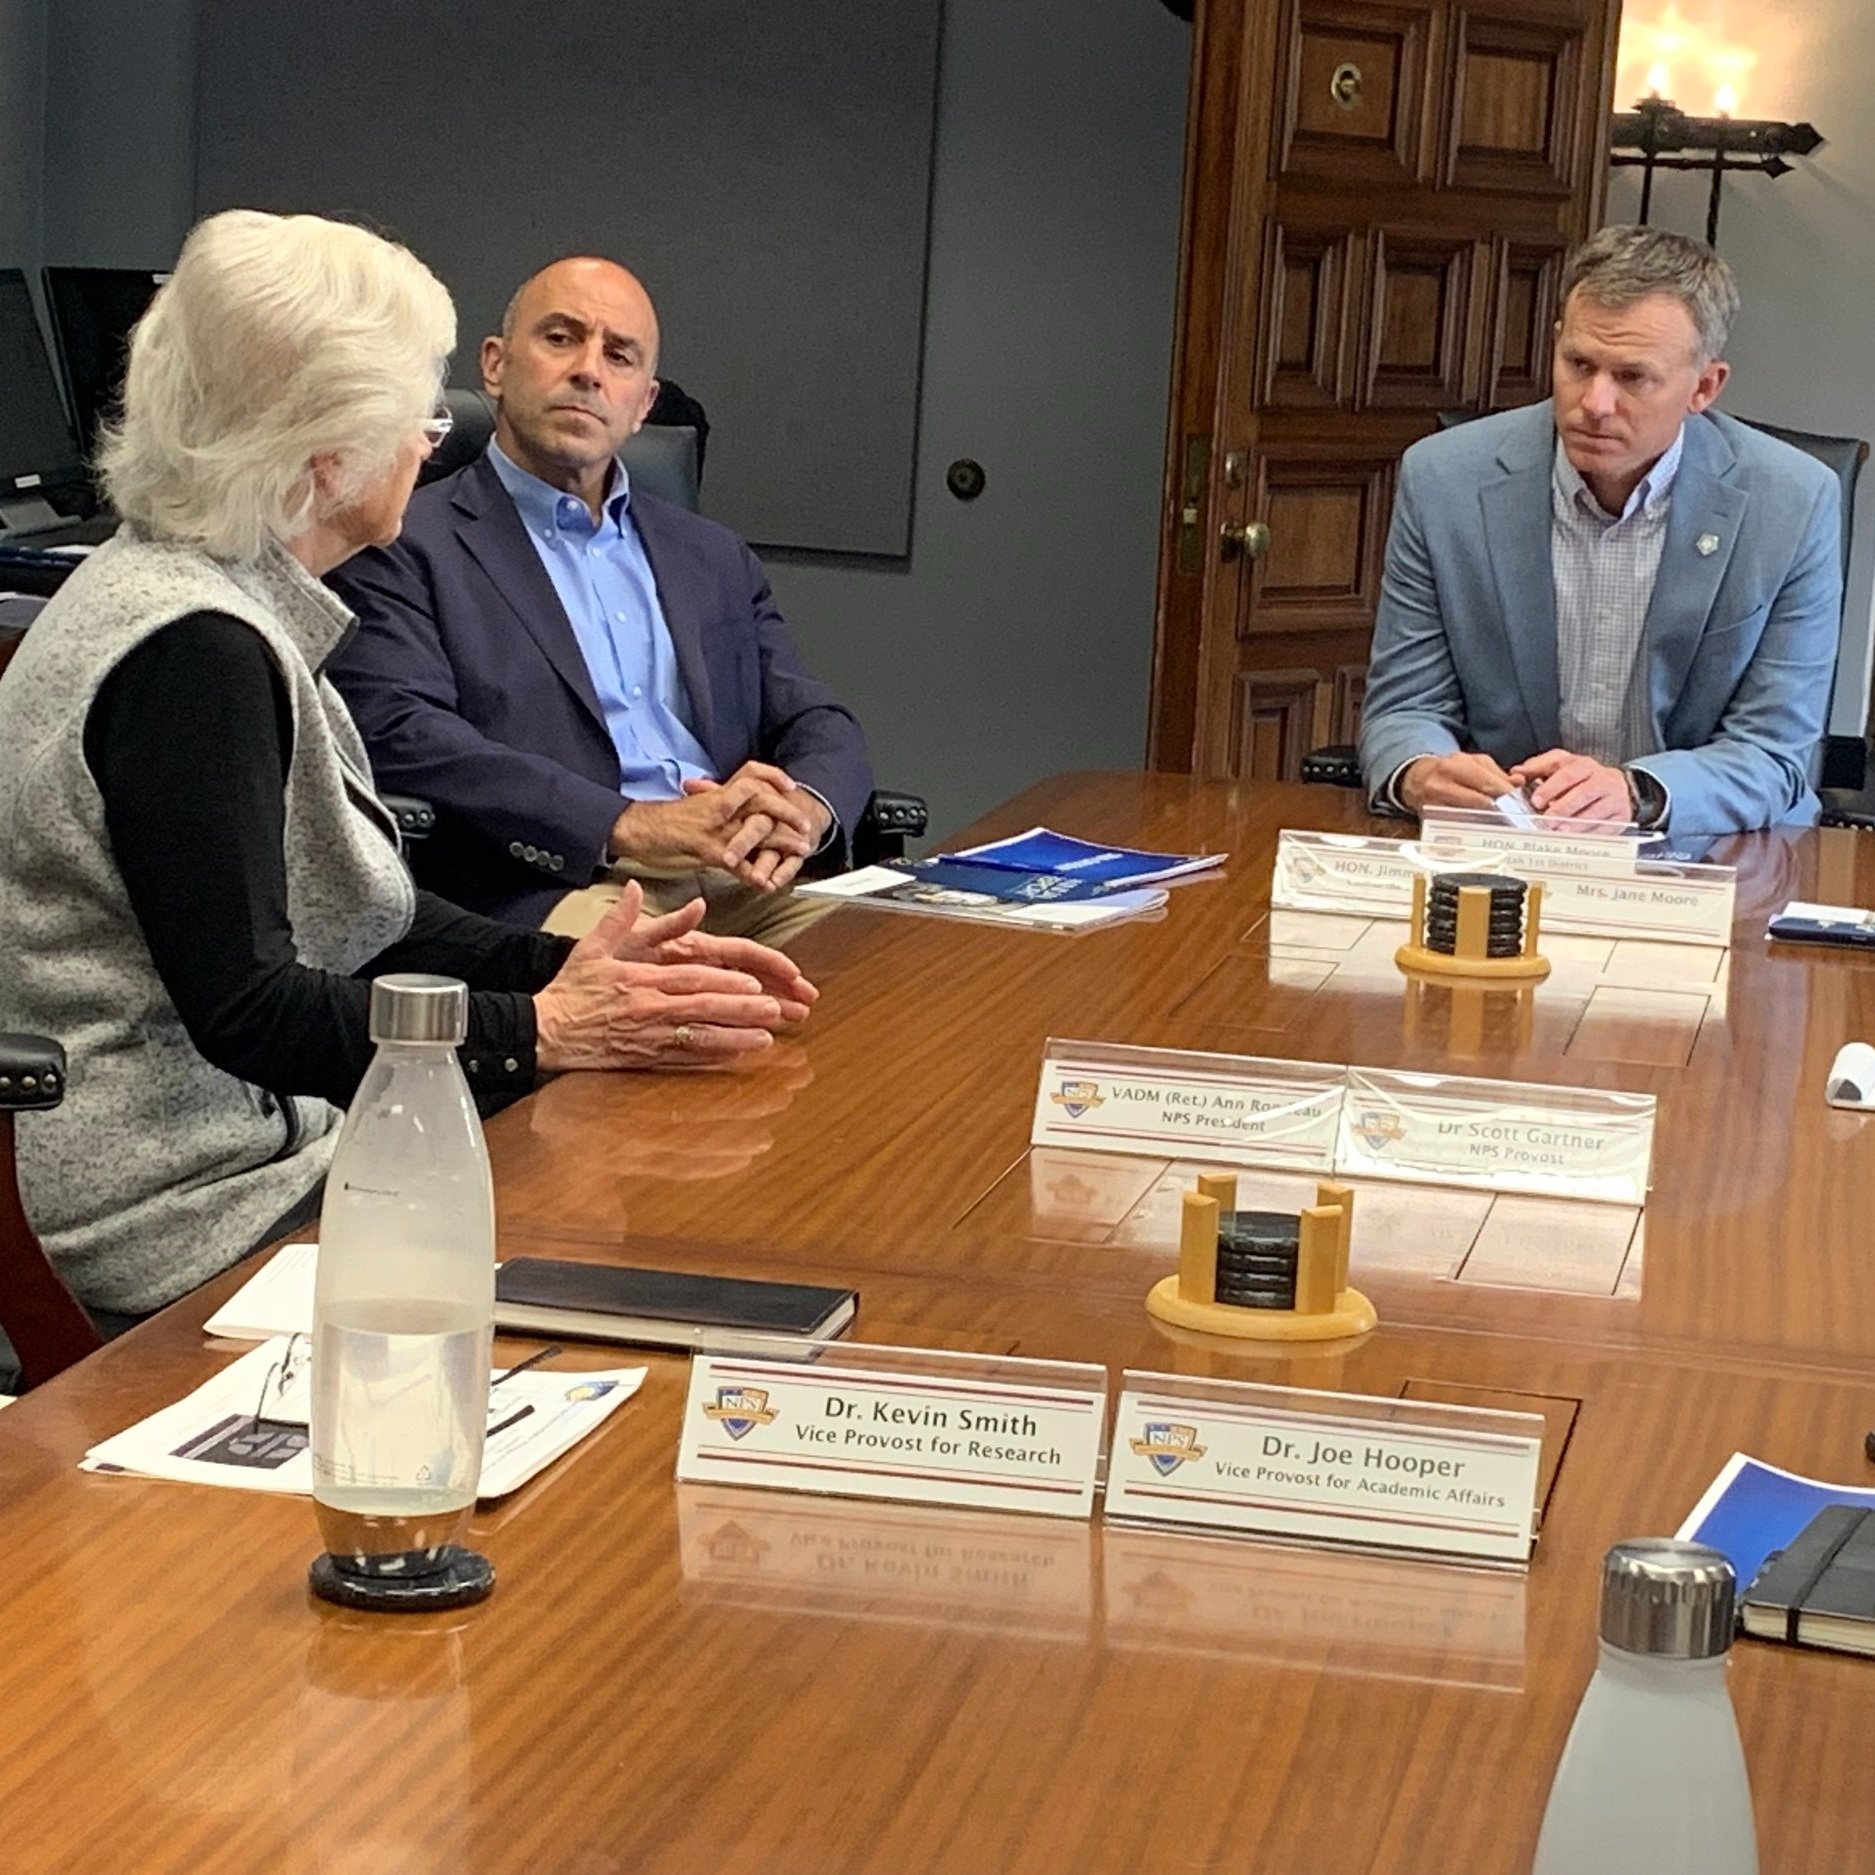 U.S. Reps. Panetta (left) and Moore meet with Retired Vice Adm. Ann E. Rondeau, President, Naval Postgraduate School in Monterey.